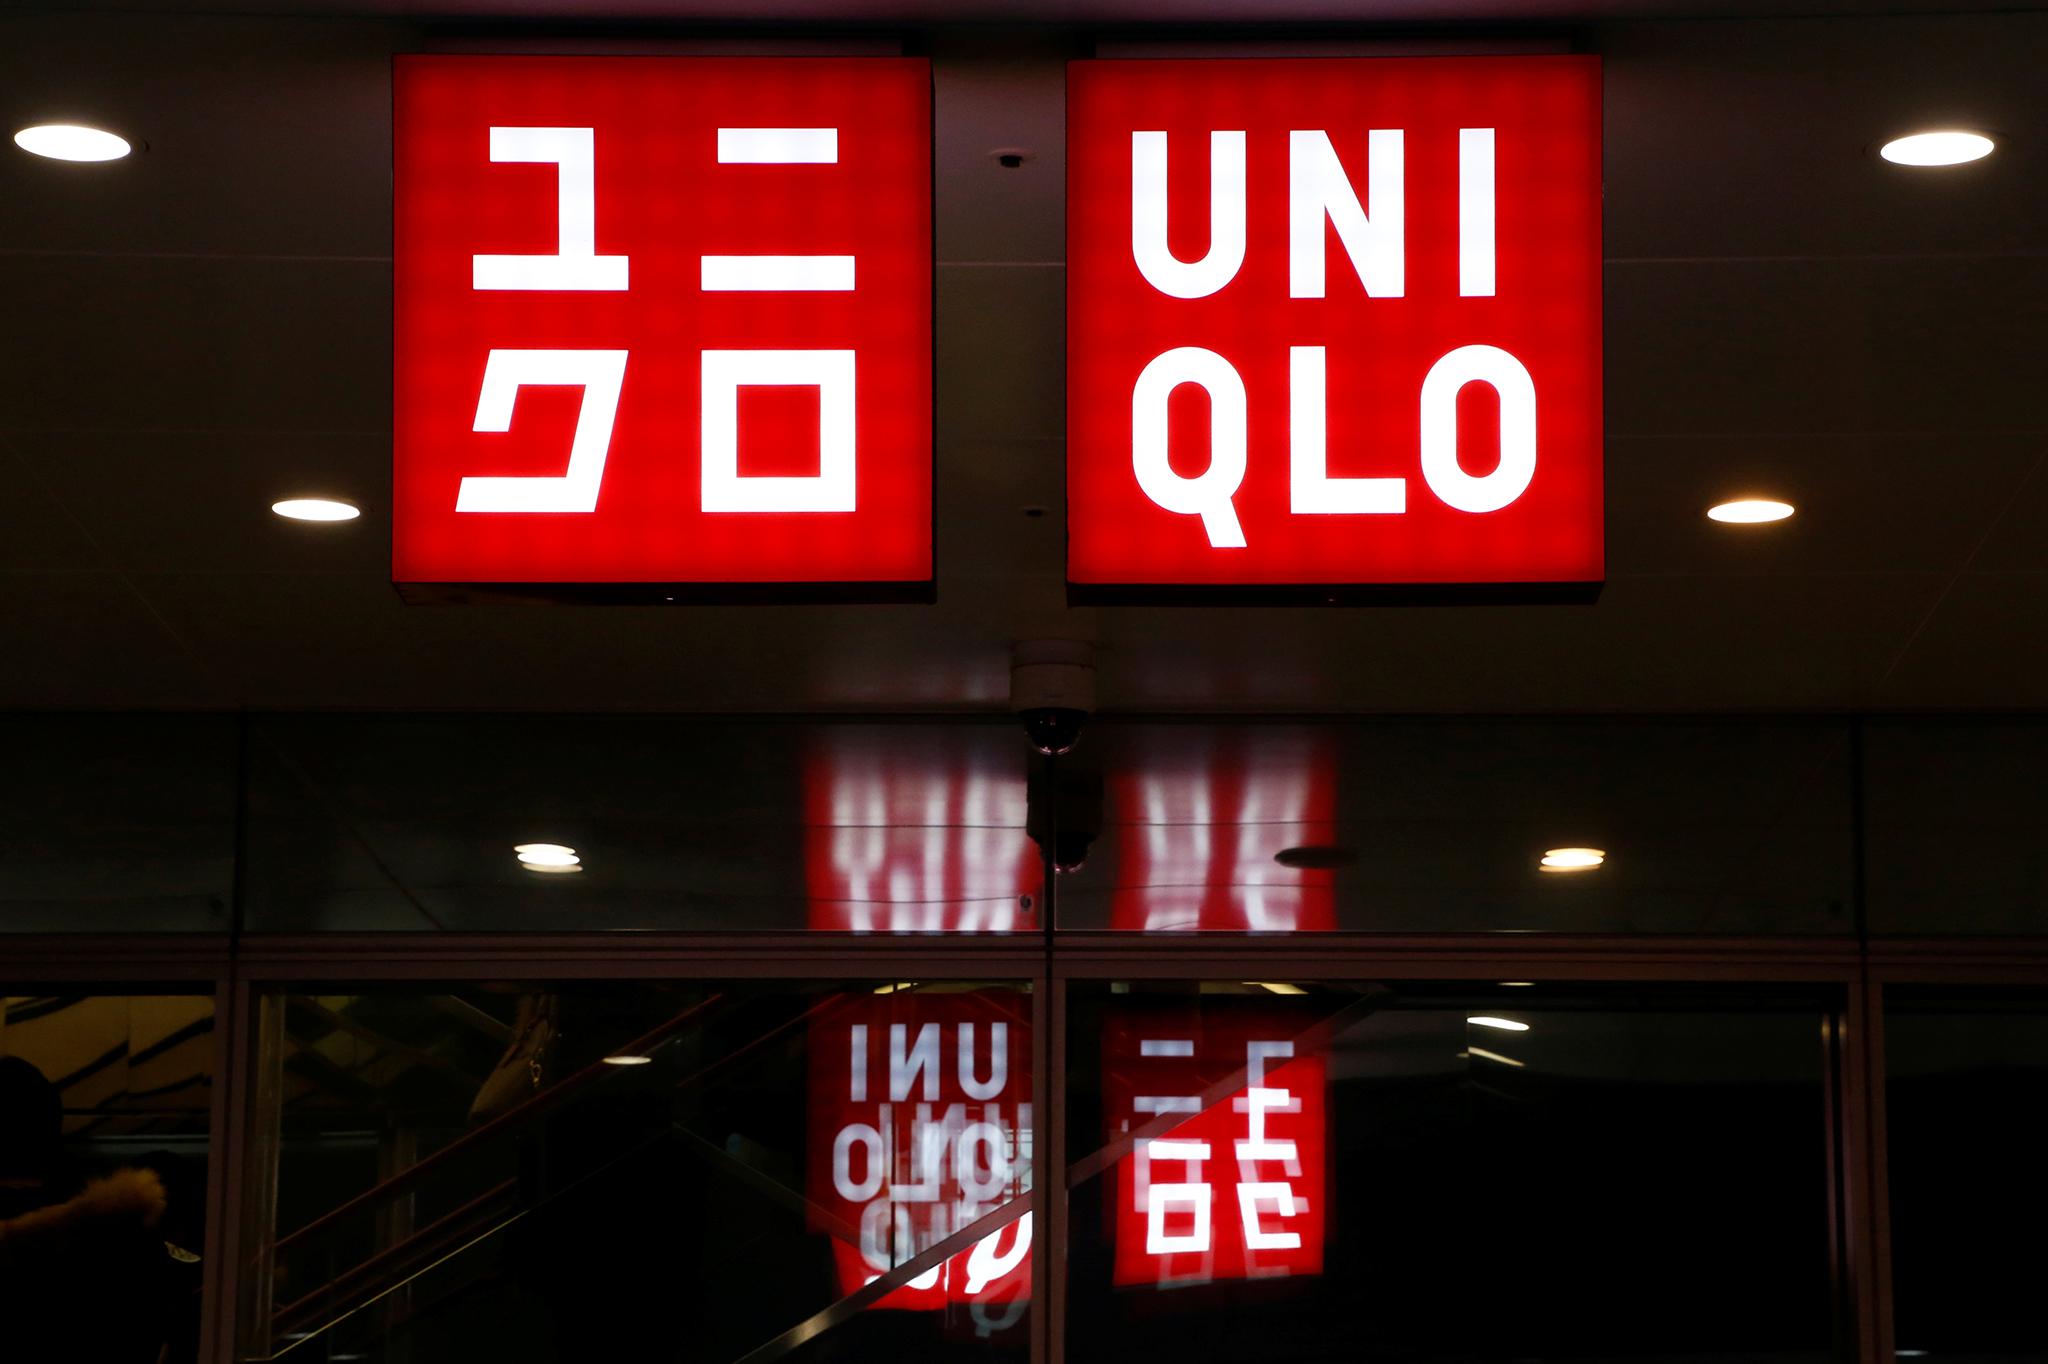 Uniqlo has performed poorly in the US, which may explain why it has chosen to launch an experimental vending machine